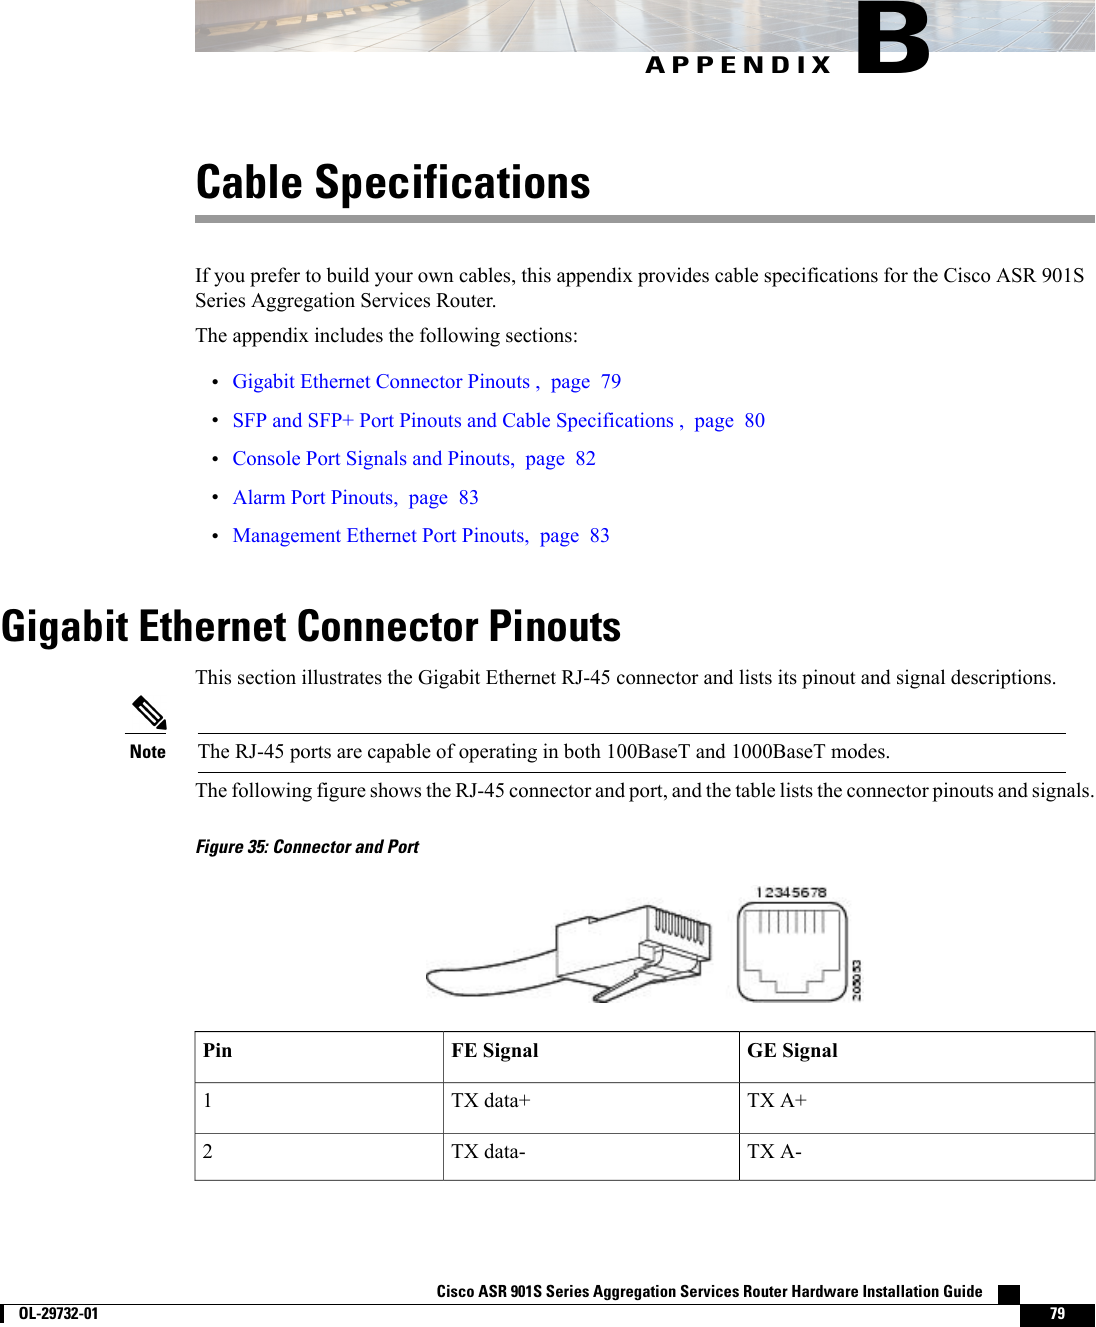 APPENDIX BCable SpecificationsIf you prefer to build your own cables, this appendix provides cable specifications for the Cisco ASR 901SSeries Aggregation Services Router.The appendix includes the following sections:•Gigabit Ethernet Connector Pinouts , page 79•SFP and SFP+ Port Pinouts and Cable Specifications , page 80•Console Port Signals and Pinouts, page 82•Alarm Port Pinouts, page 83•Management Ethernet Port Pinouts, page 83Gigabit Ethernet Connector PinoutsThis section illustrates the Gigabit Ethernet RJ-45 connector and lists its pinout and signal descriptions.The RJ-45 ports are capable of operating in both 100BaseT and 1000BaseT modes.NoteThe following figure shows the RJ-45 connector and port, and the table lists the connector pinouts and signals.Figure 35: Connector and PortGE SignalFE SignalPinTX A+TX data+1TX A-TX data-2Cisco ASR 901S Series Aggregation Services Router Hardware Installation Guide        OL-29732-01 79